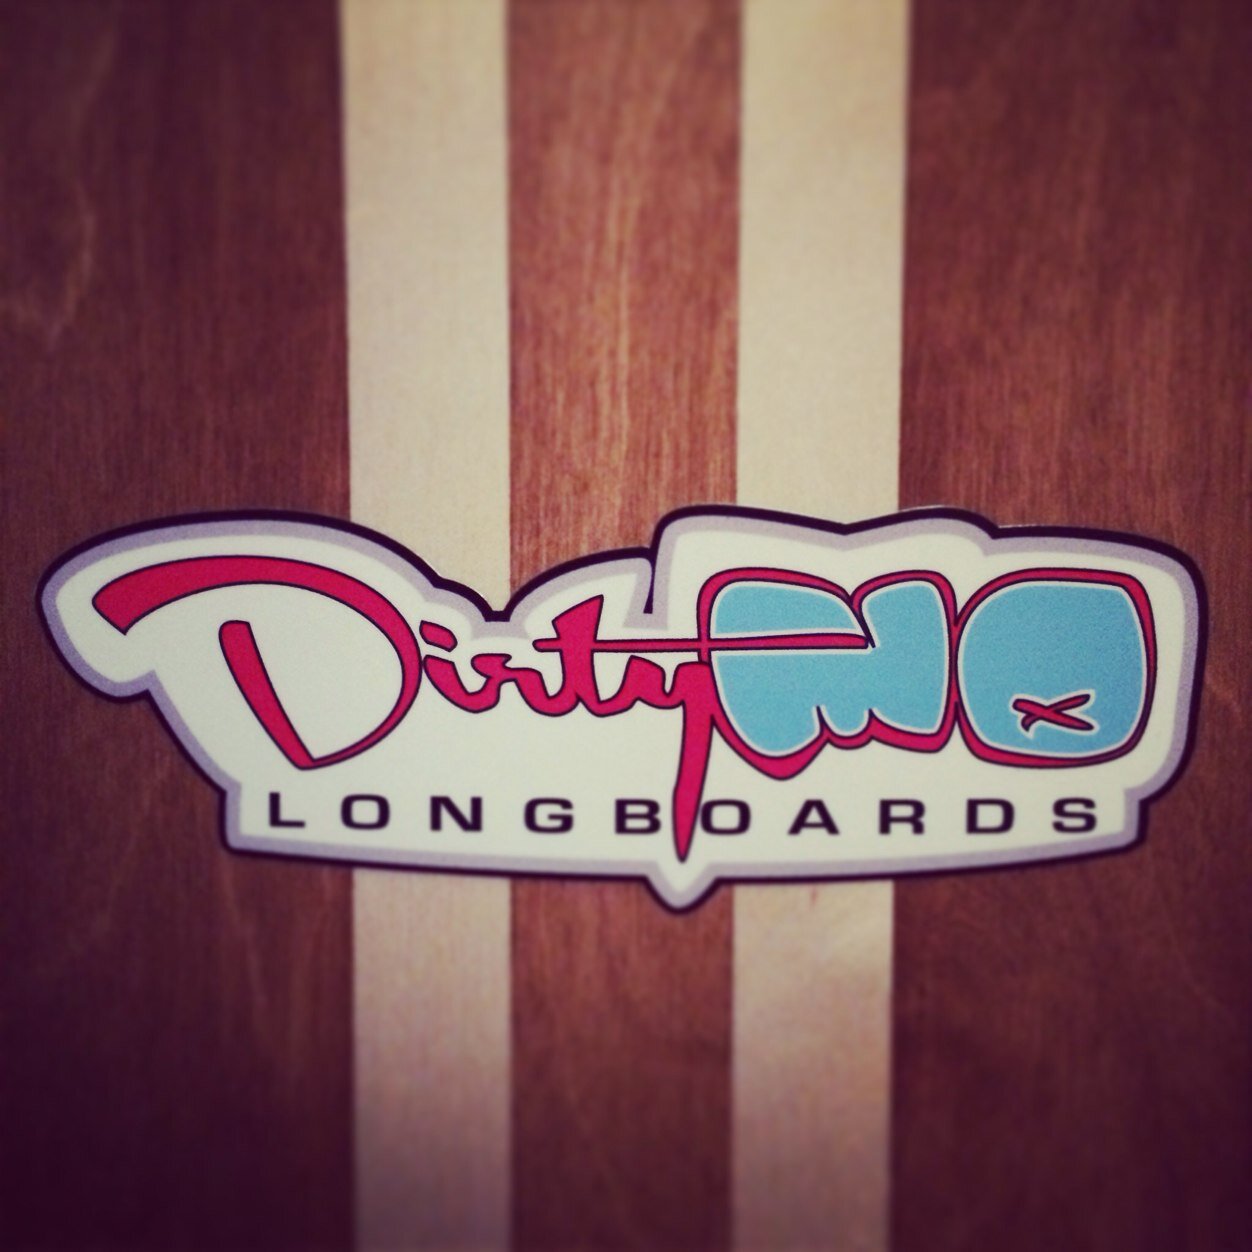 Dirty Mo Longboards are handcrafted in Mooresville, NC using high quality materials.